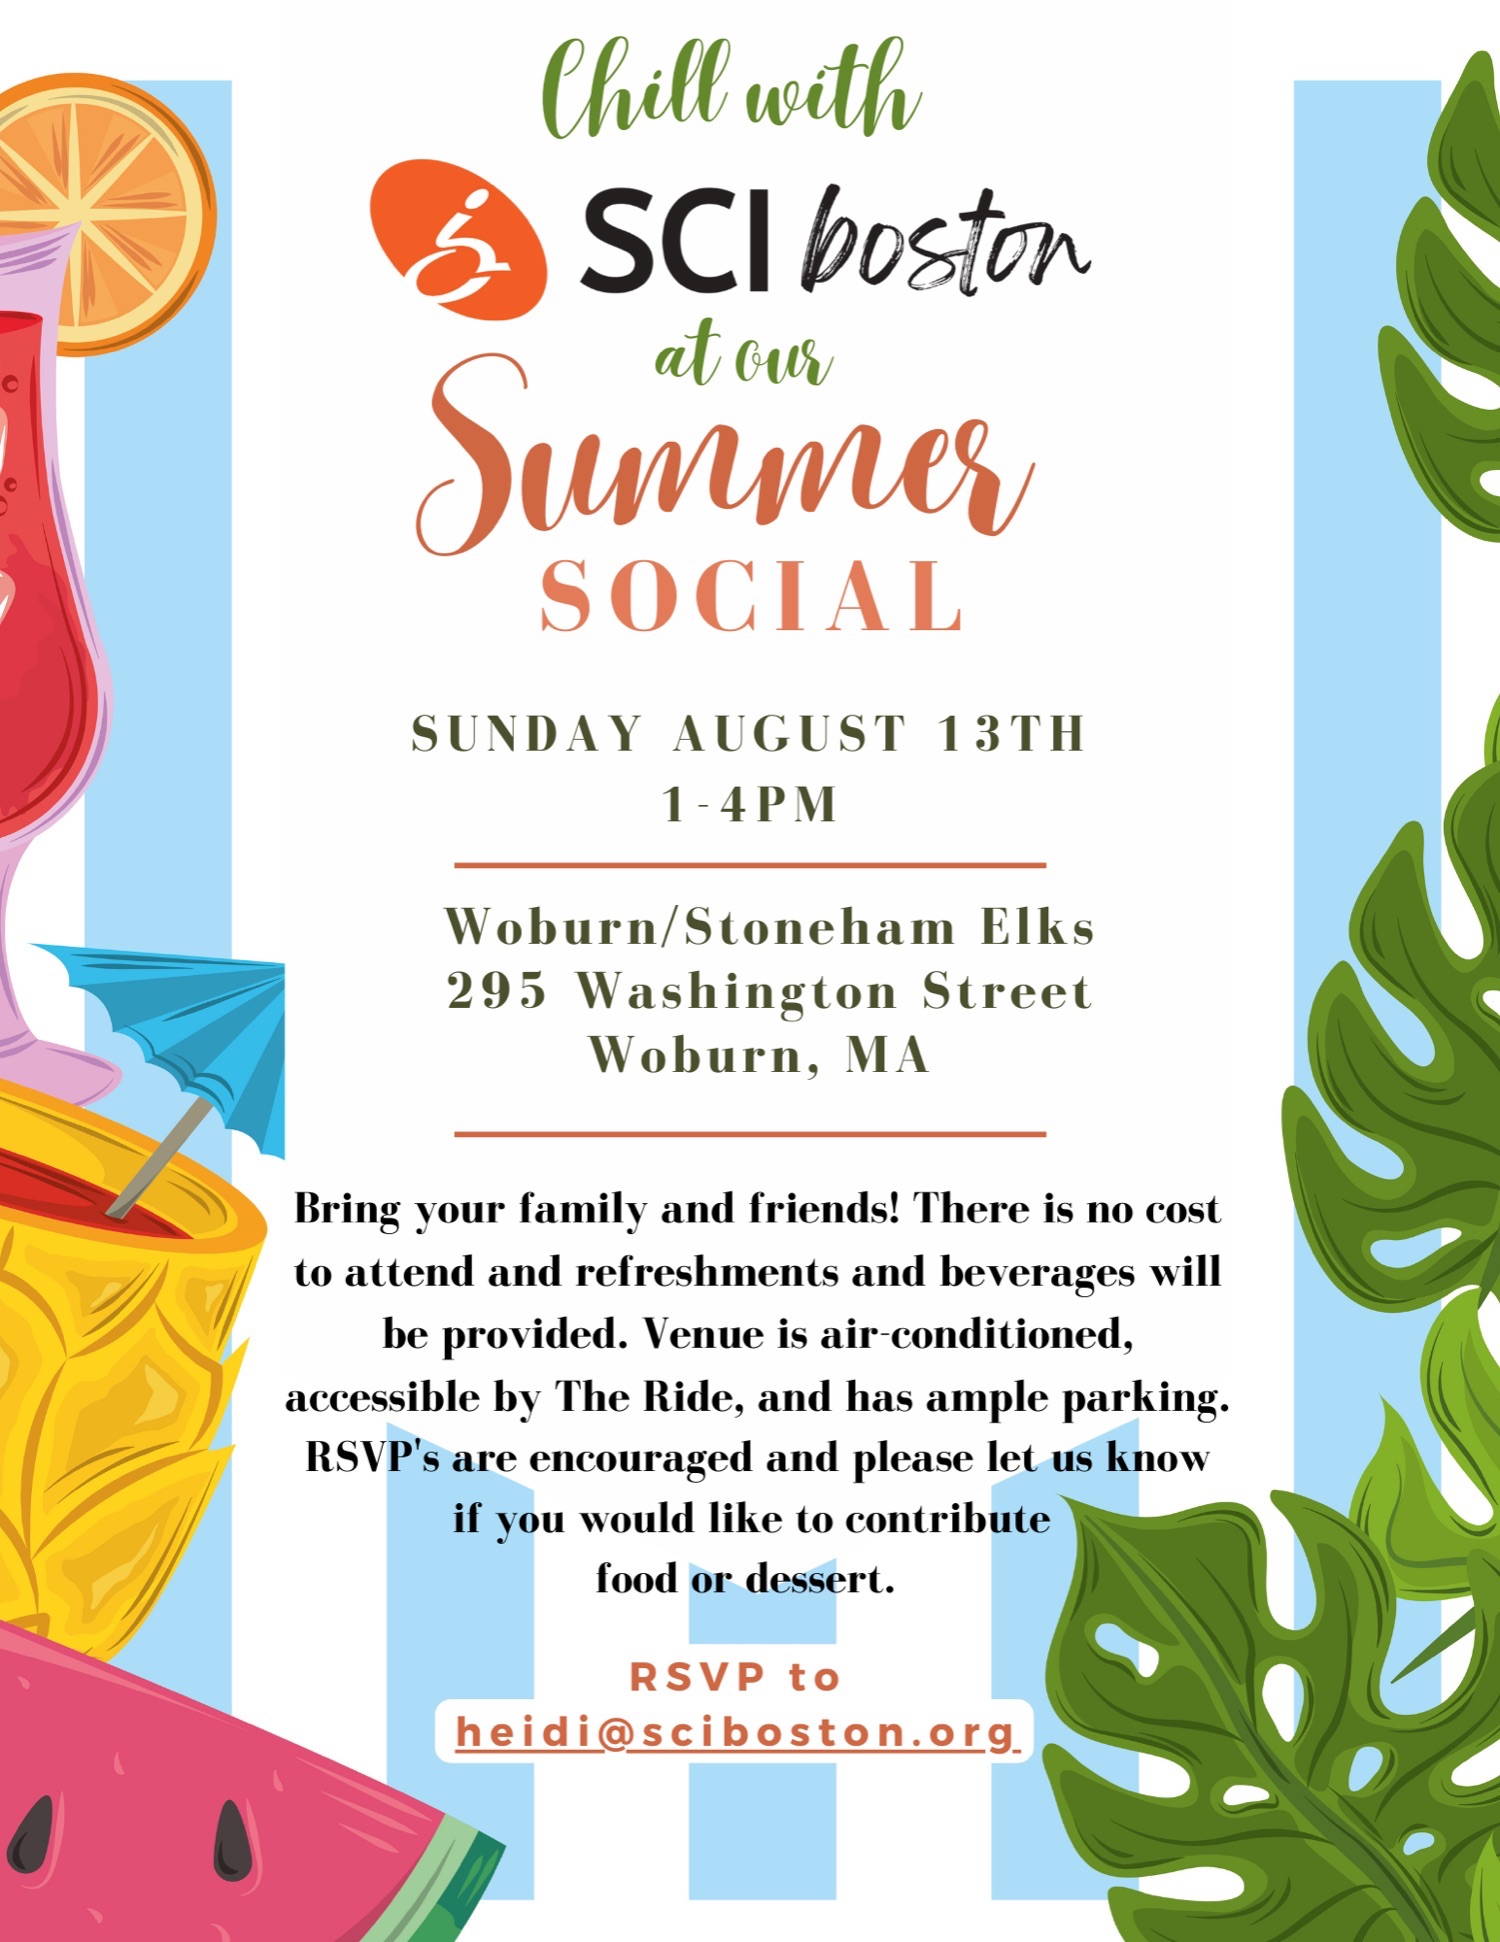 Image description: a flyer with multicolored graphics cocktail drinks, watermelon, Green leaves as a backdrop. Text reads: chill with sci boston at our summer social. Sunday, August 13 1-4 PM. Woburn/Stoneham Elks 295 Washington St. Woburn, MA. Bring your friends and family! There's no cost to attend and refreshments and beverages Will be provided. Venue is air-conditioned, accessible by the ride, and has ample parking. RSVPs are encouraged and please let us know if you would like to contribute food or dessert. Click image to RSVP to Heidi@sciboston.org.